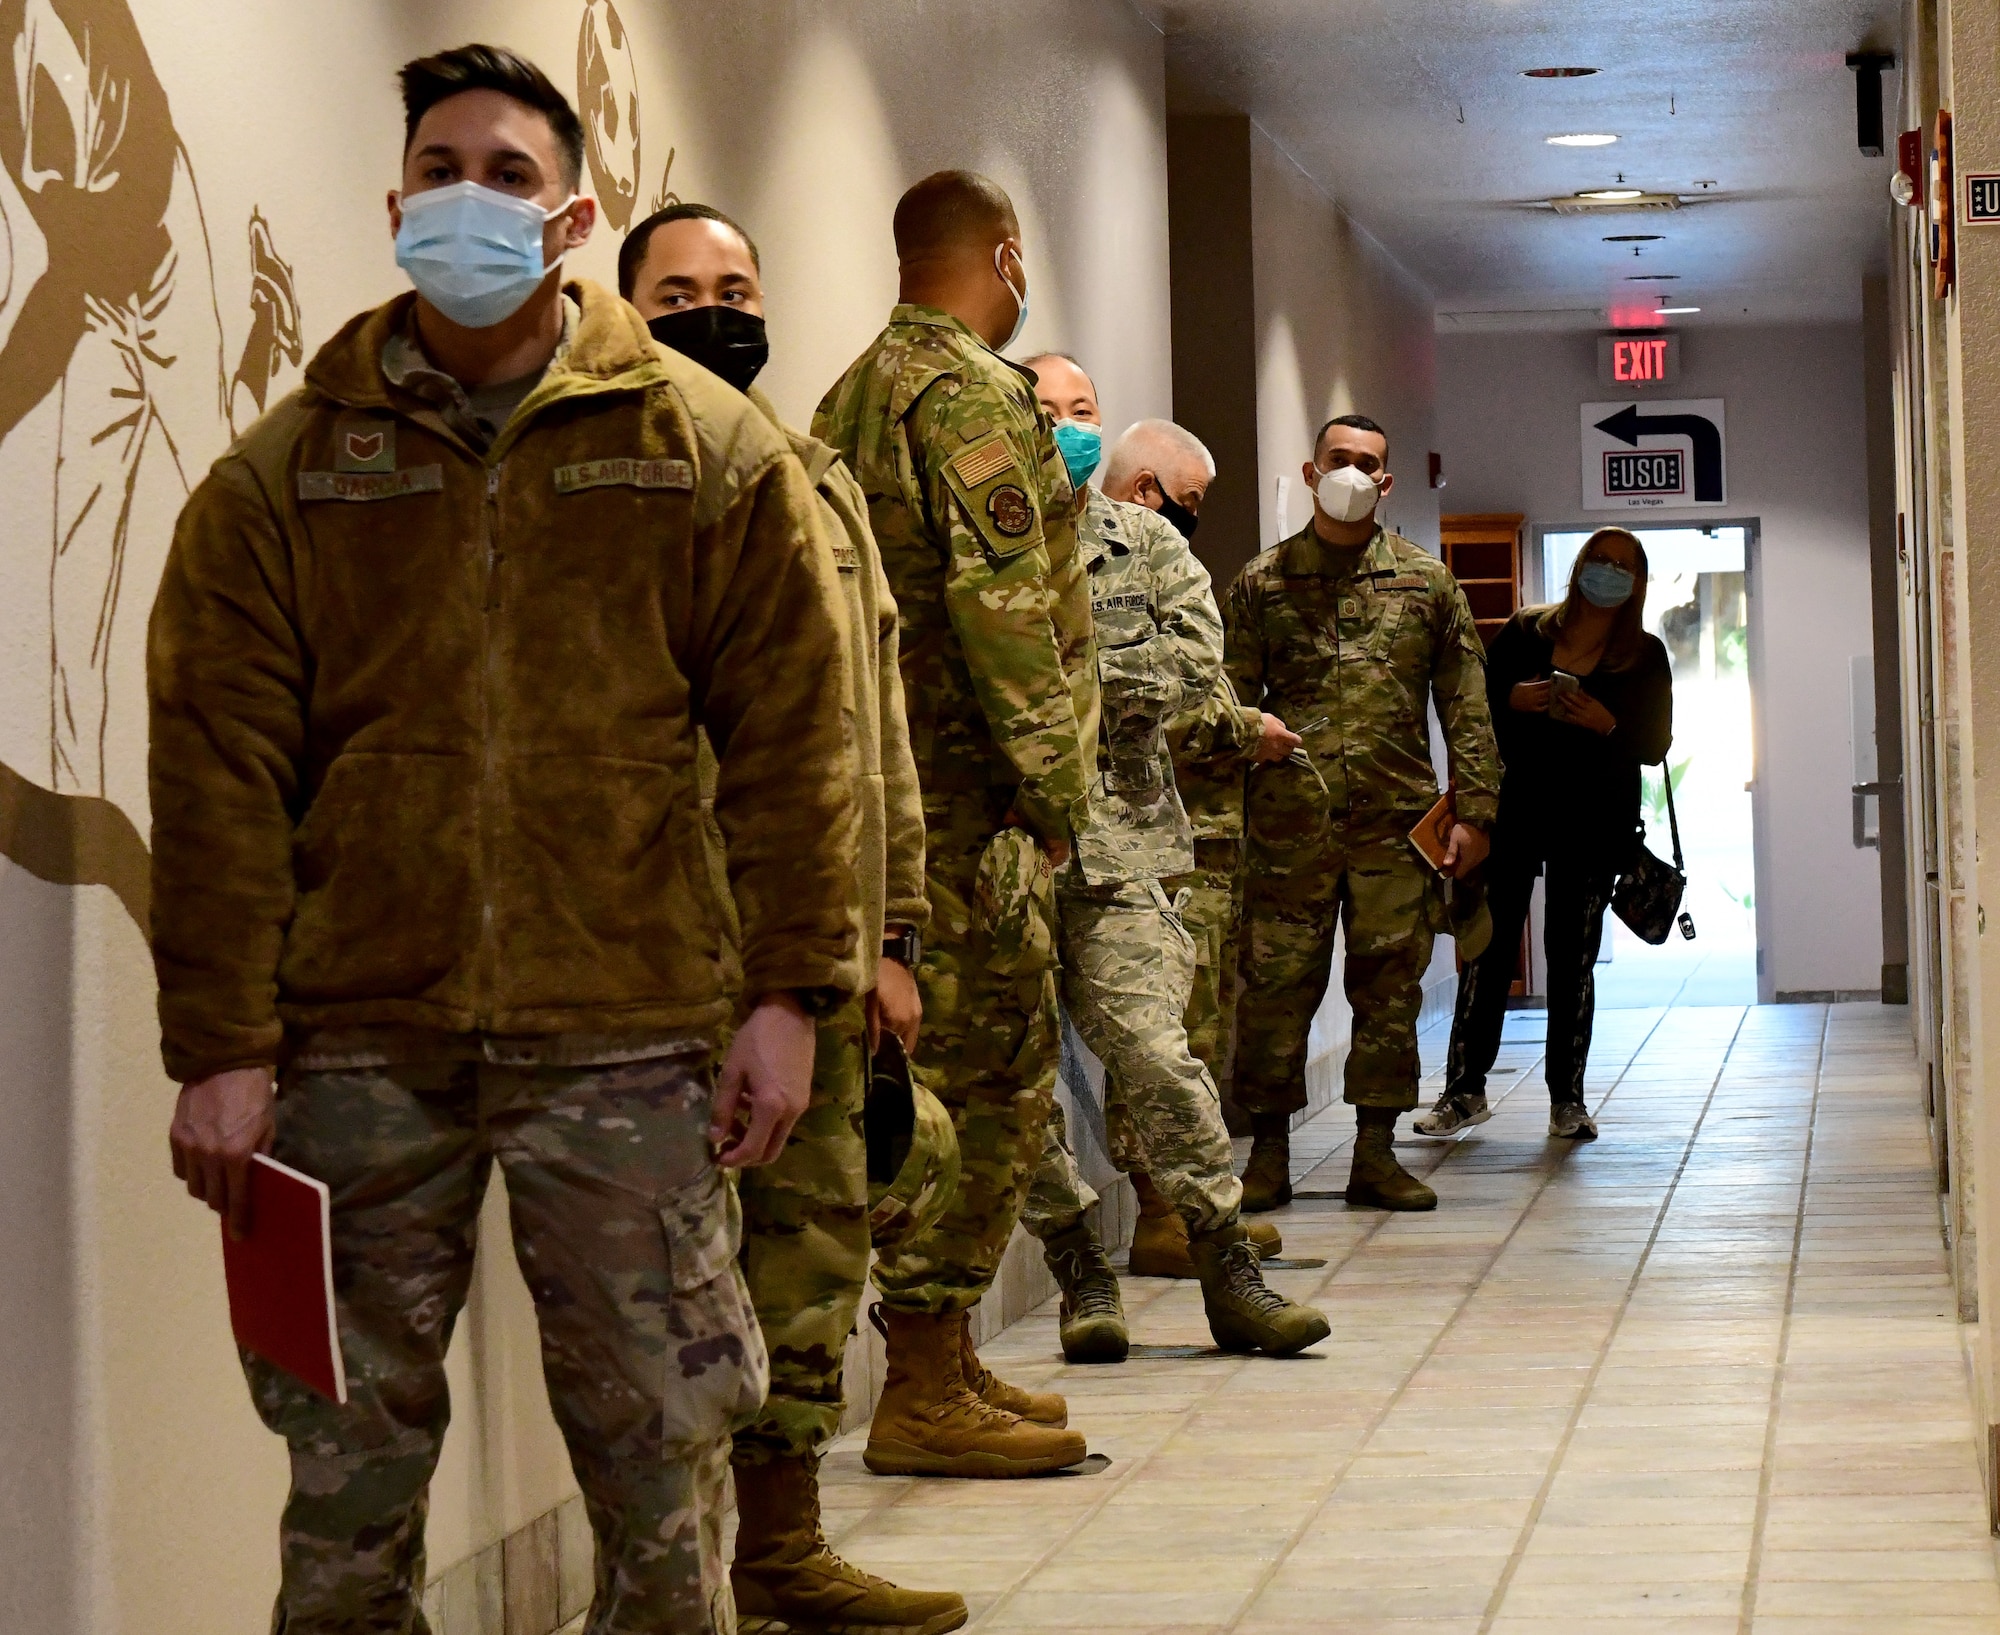 Members of the 926th Wing wait to receive their first dose of the COVID-19 vaccination during the Unit Training Assembly, Jan. 9, at Nellis Air Force Base, Nevada. (U.S. Air Force Photo by Staff Sgt. Lorna Booze)